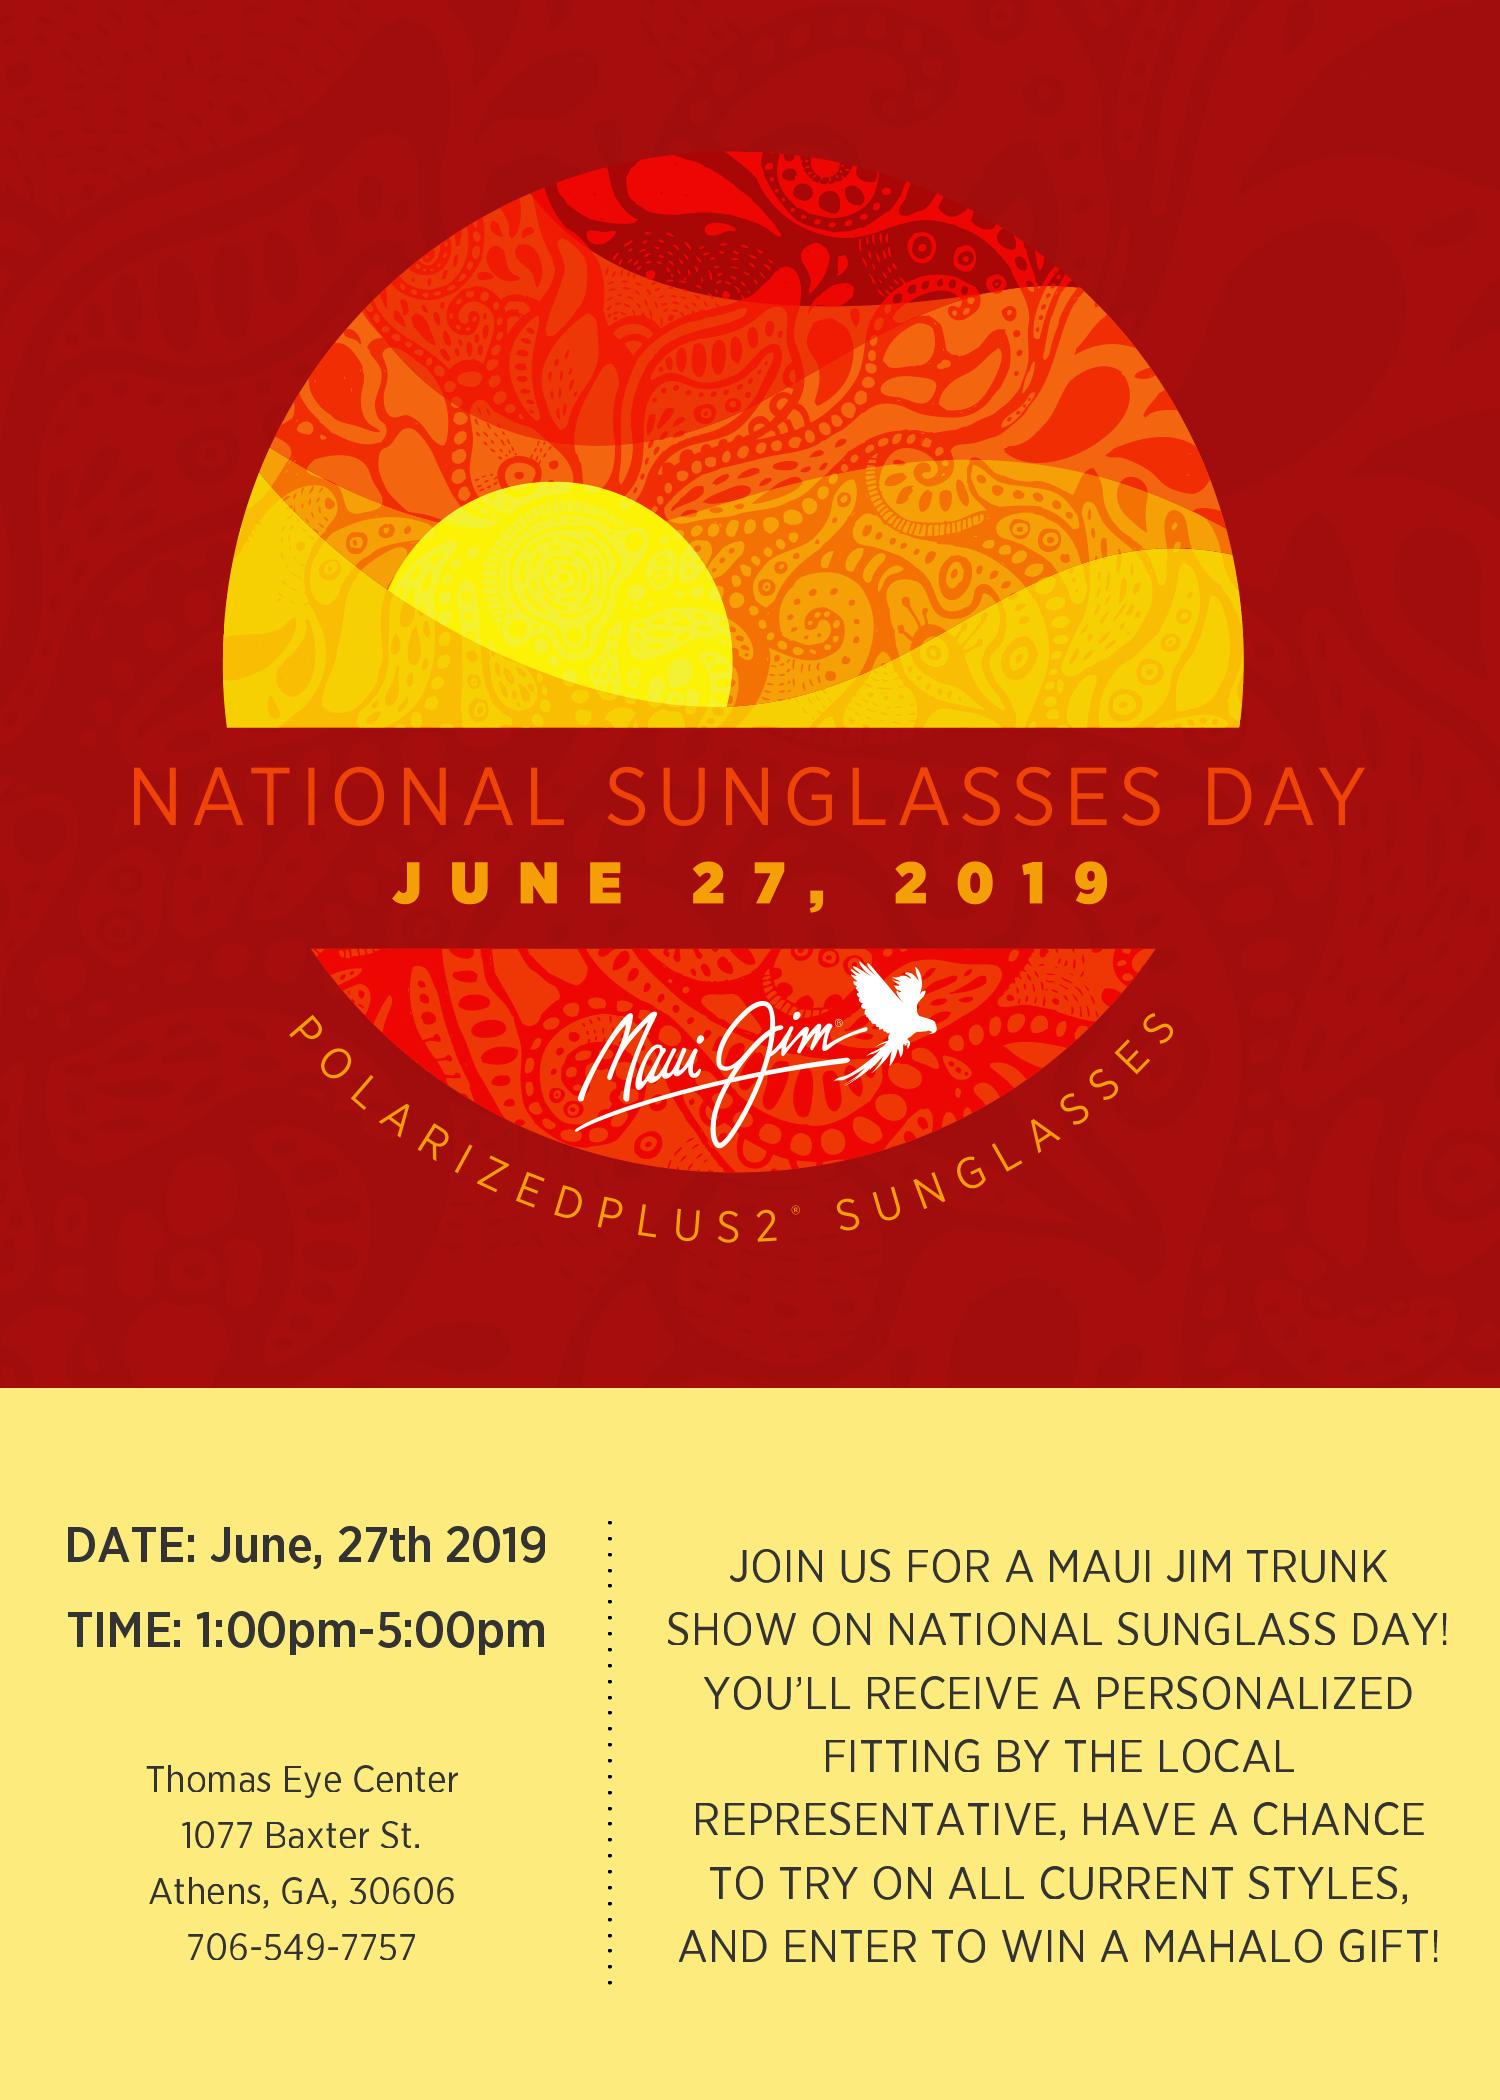 National Sunglasses Day.  June 27, 2019  Join us for a Maui Jim Trunk Show on national sunglass day!  You'll receive a personalized fitting by the local representative, have a chance to try on all current styles, and enter to win a mahalo gift! June 27, 2019 from 1:00pm to 5:00pm at Thomas Eye Center 1077 Baxter St Athens, Georgia 30606 706-549-7757